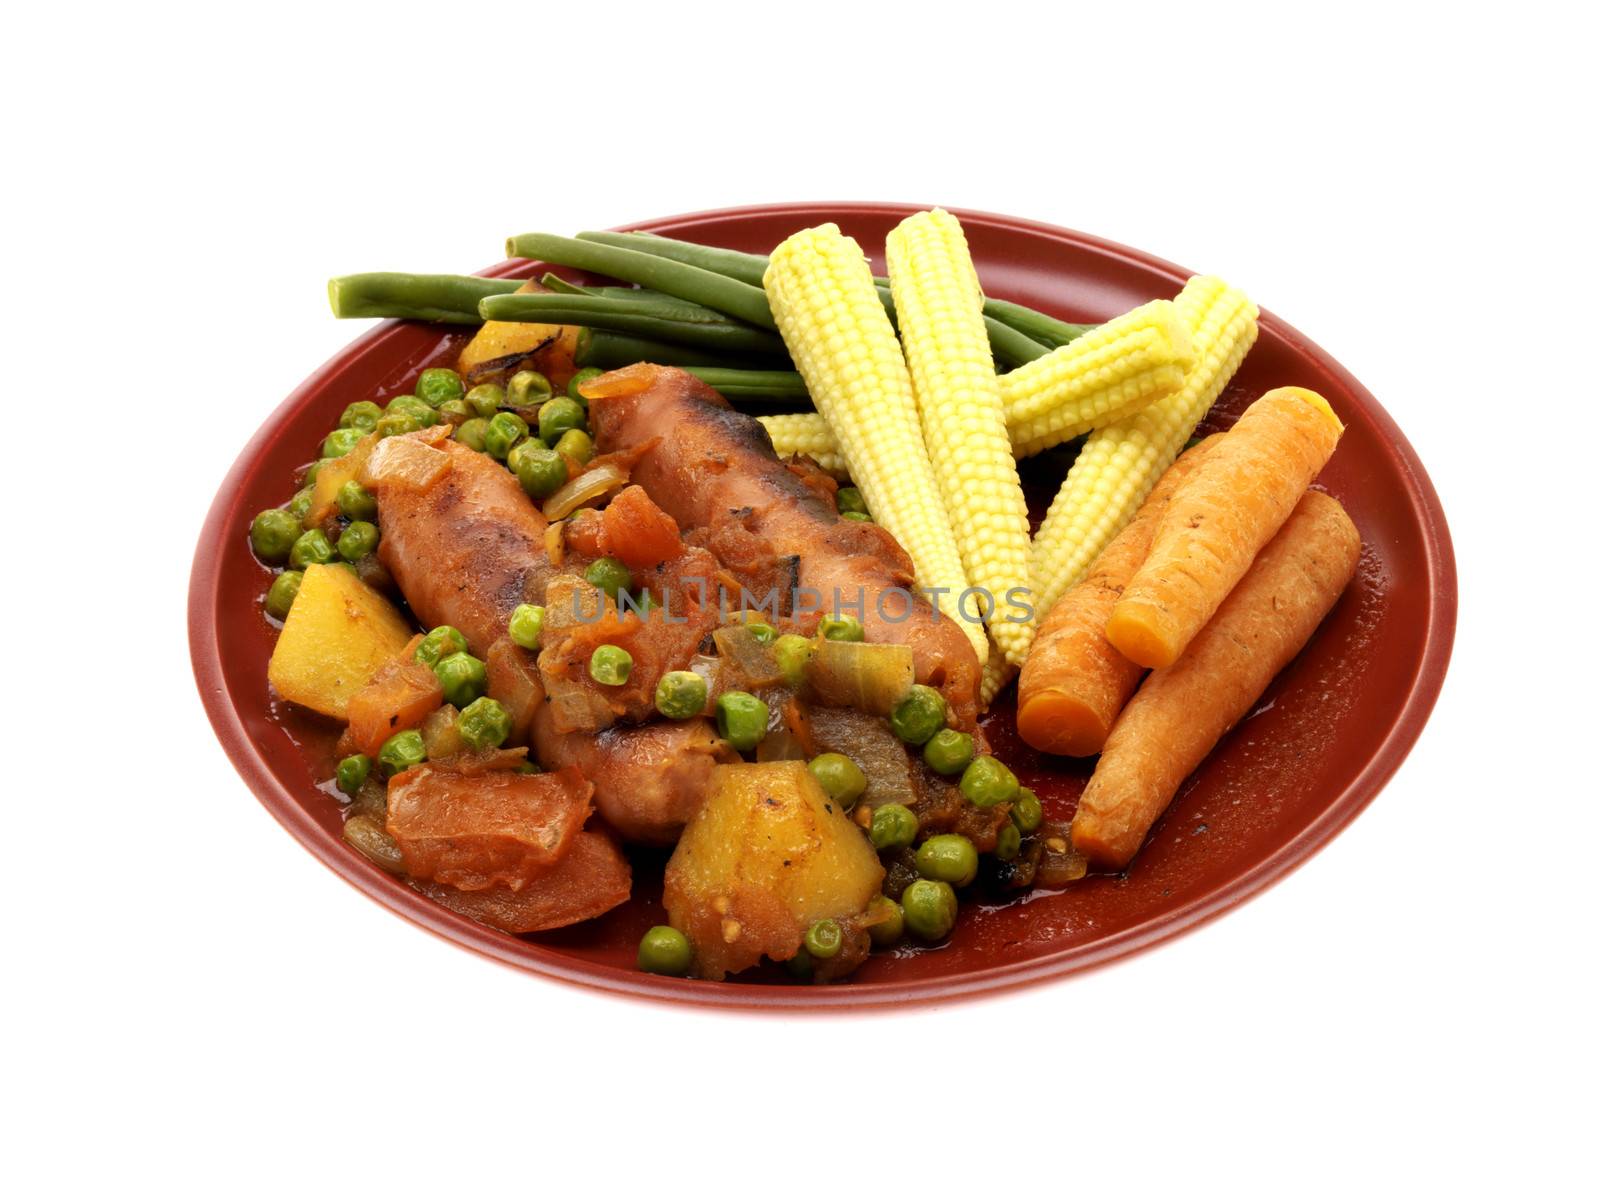 Sausage Casserole With Vegetables